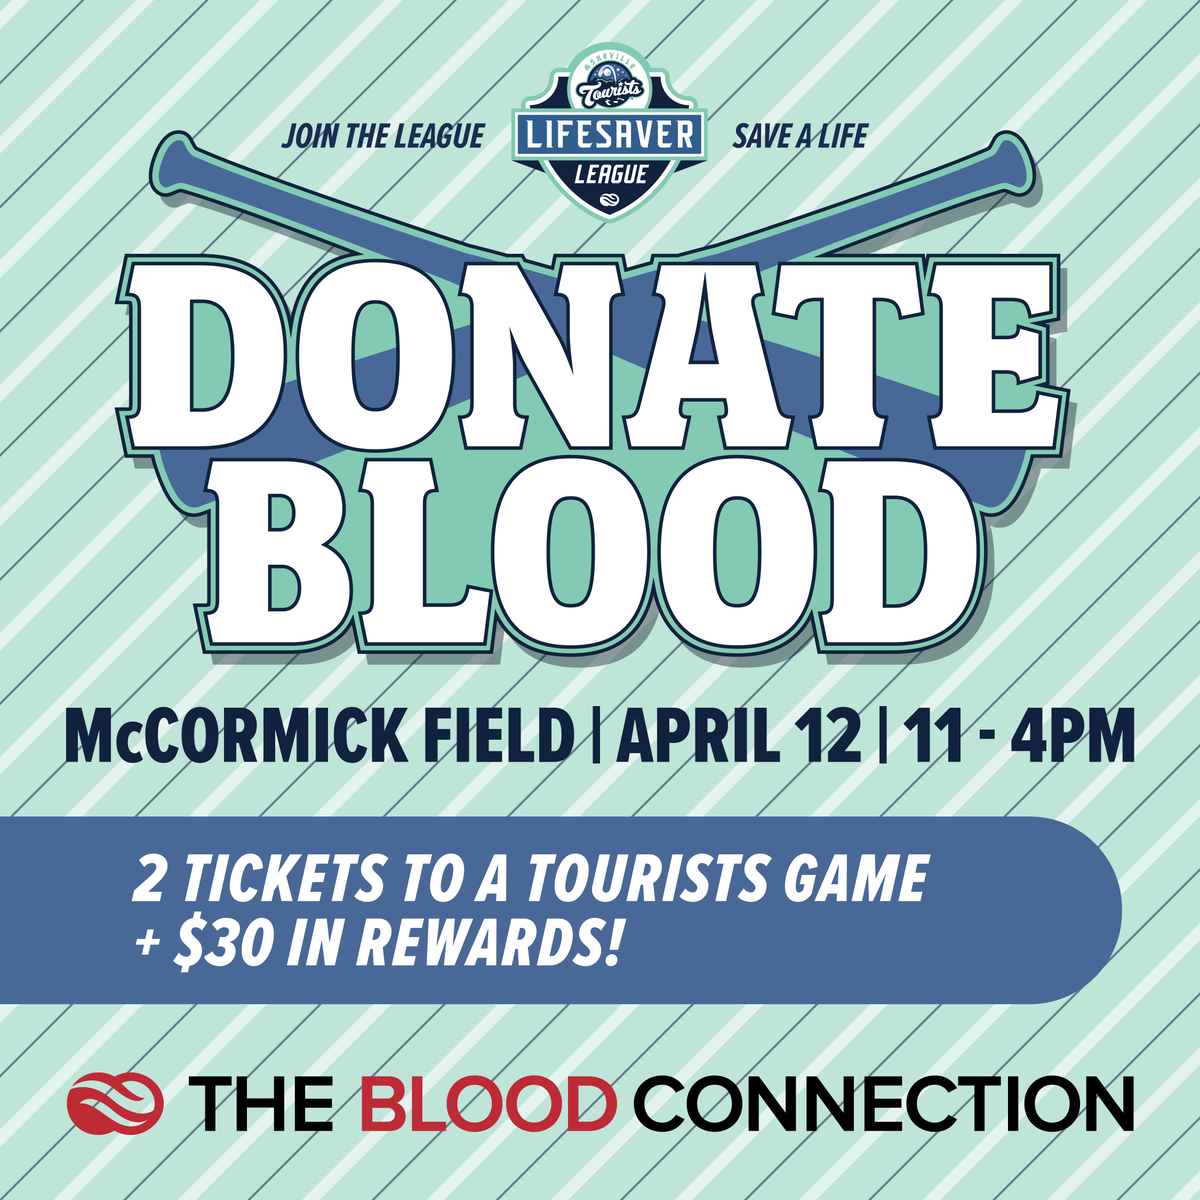 Hey @GoTourists Fans! This Friday, April 12, make your way to McCormick Field and donate blood. Not only will you be making a difference in someone's life, but you'll also score big with 2 Tickets to a Tourists game and $30 in rewards! ⚾ Sign up 👉 thebloodconnection.org/tourists/